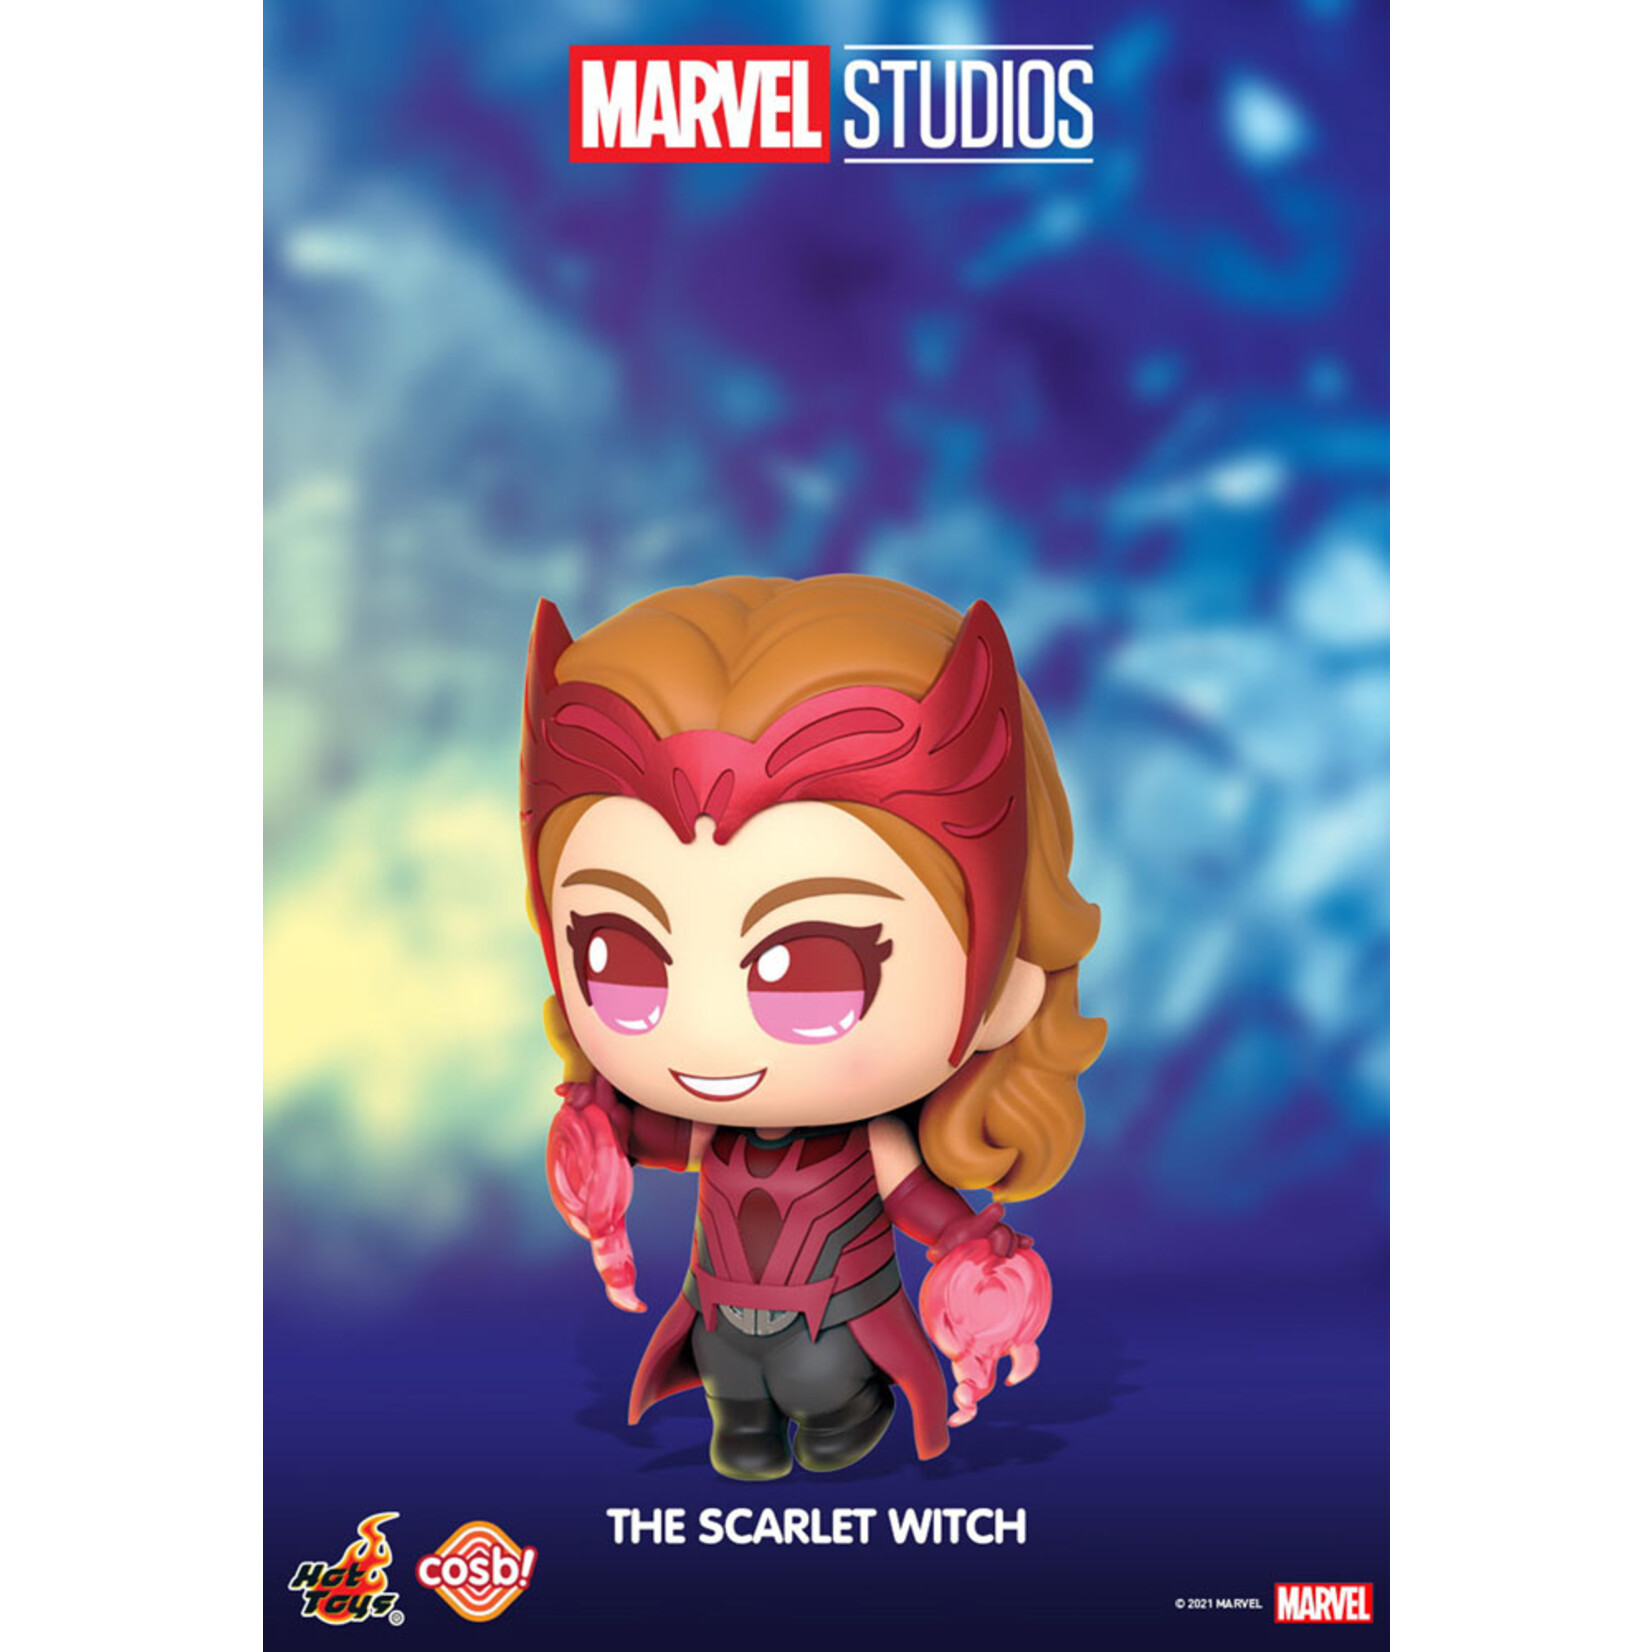 Hot Toys Hot Toys Marvel Cosbi Mini Figure Scarlet Witch